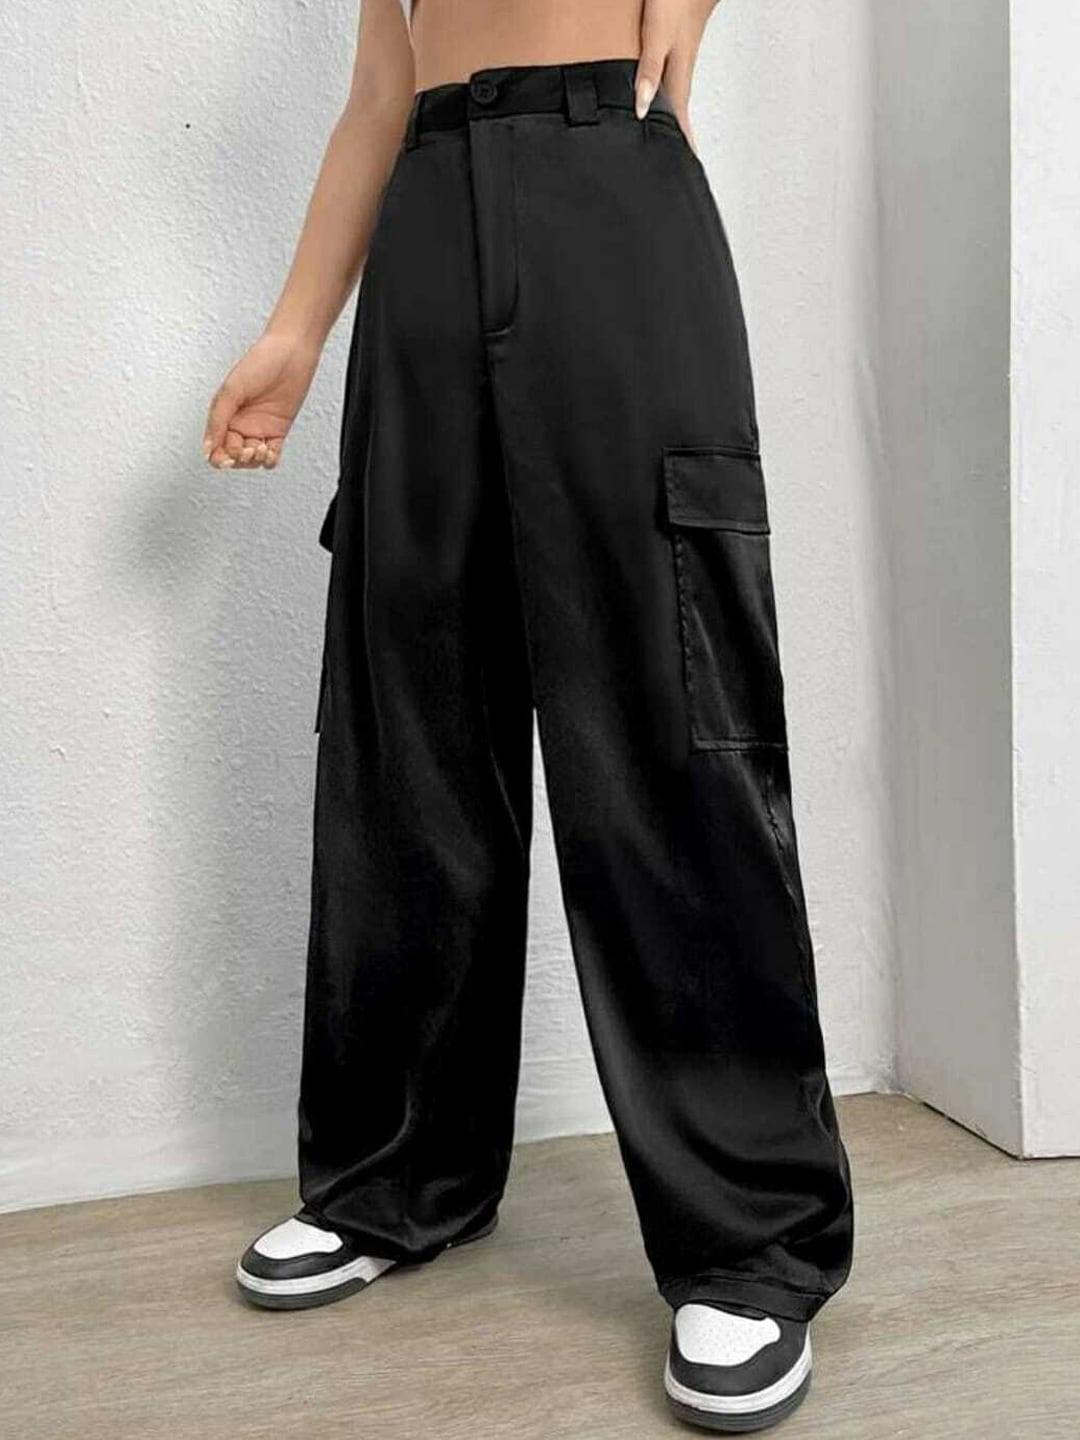 next-one-women-relaxed-straight-leg-loose-fit-high-rise-easy-wash-cargos-trouser